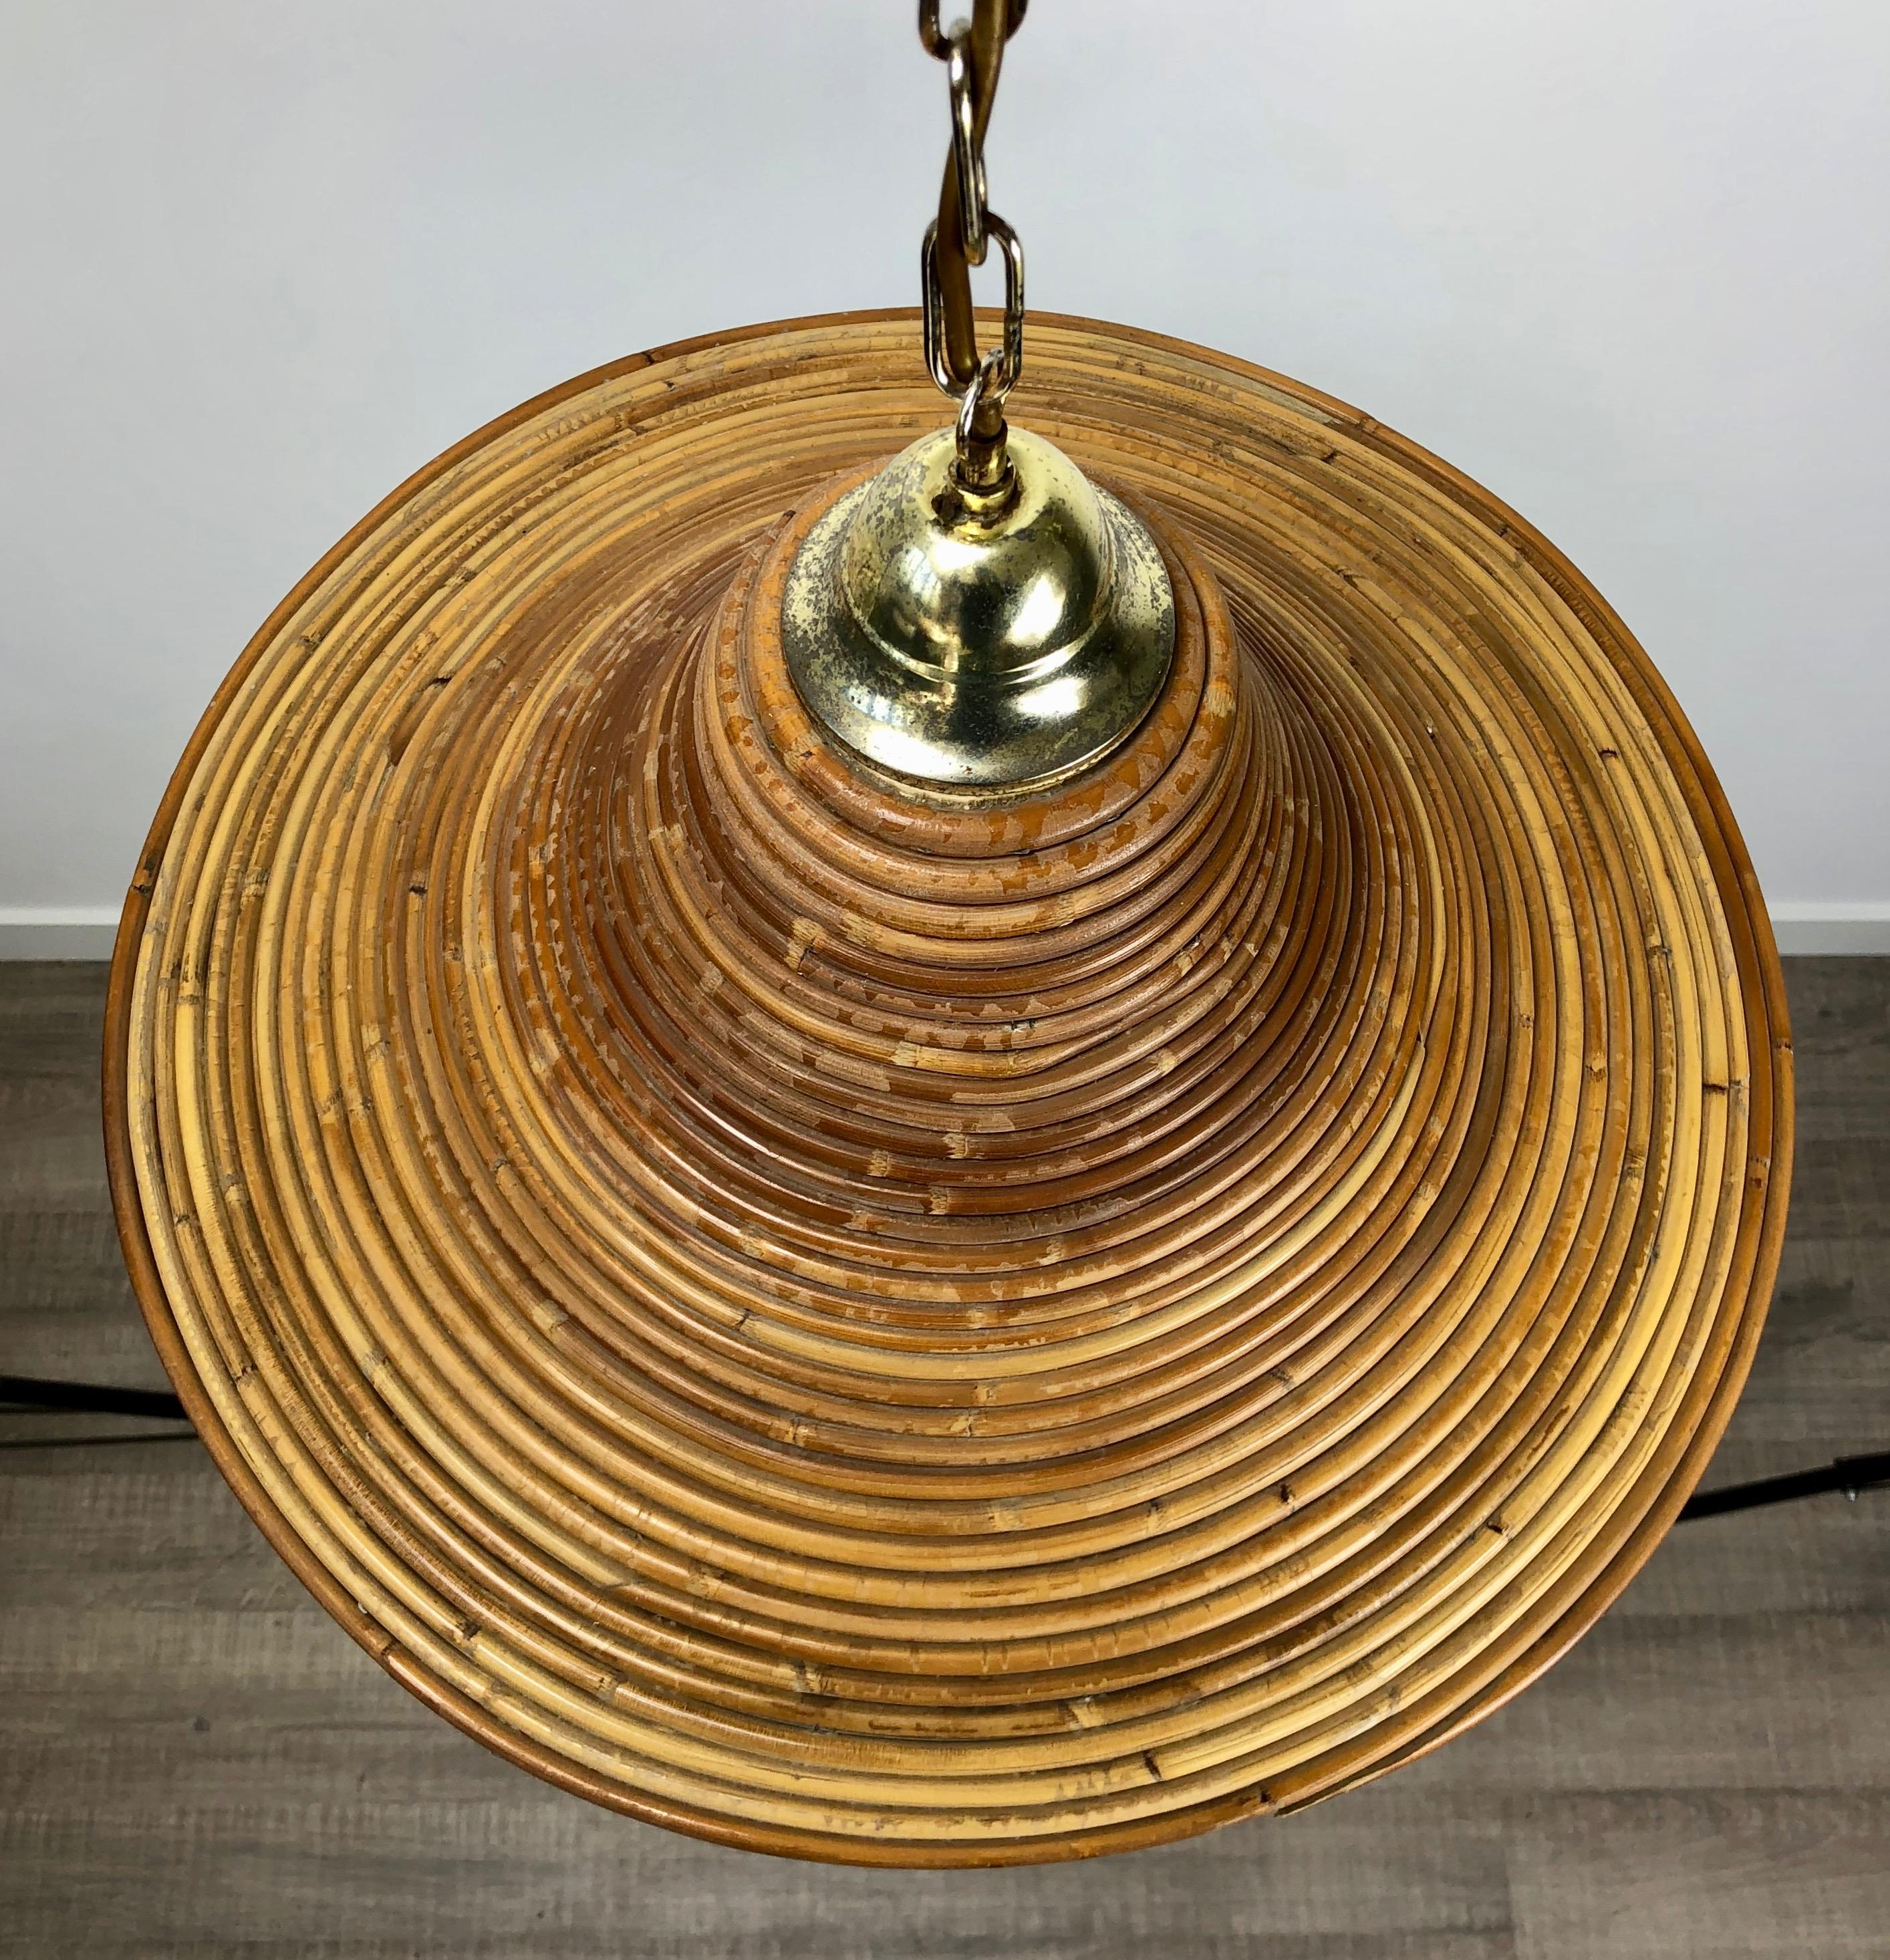 Mid-20th Century Bamboo and Brass Rattan Chandelier Pendant Light, Crespi Style, Italy, 1950s